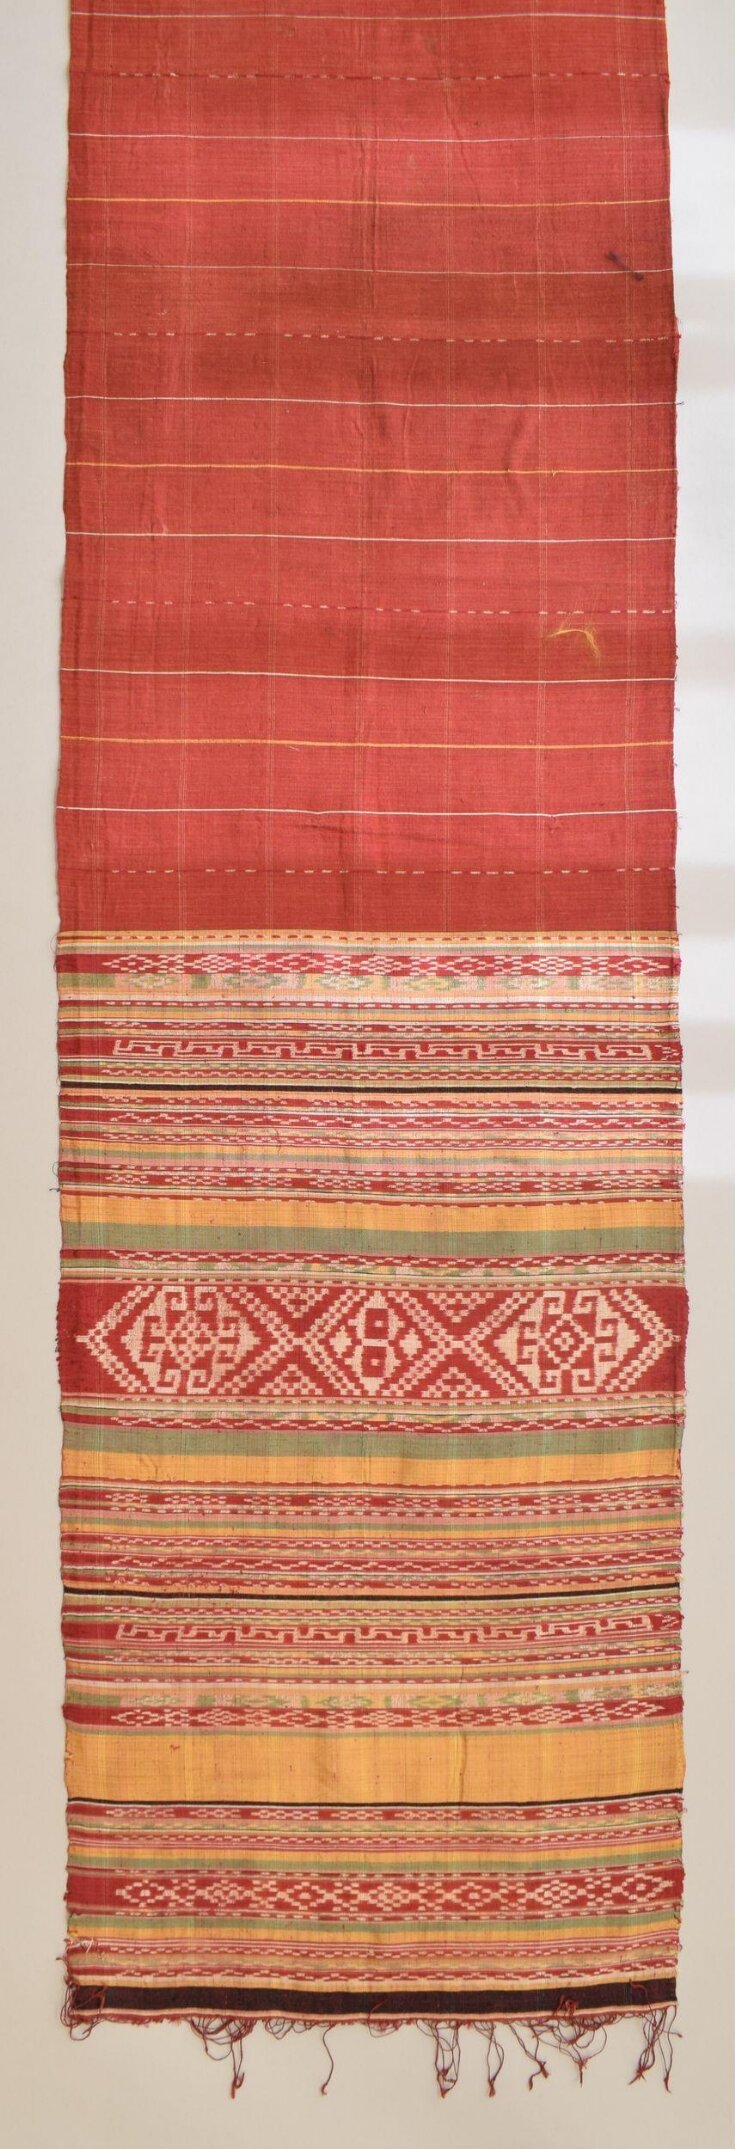 Two Parts of a Shan Weft-Ikat Cloth top image